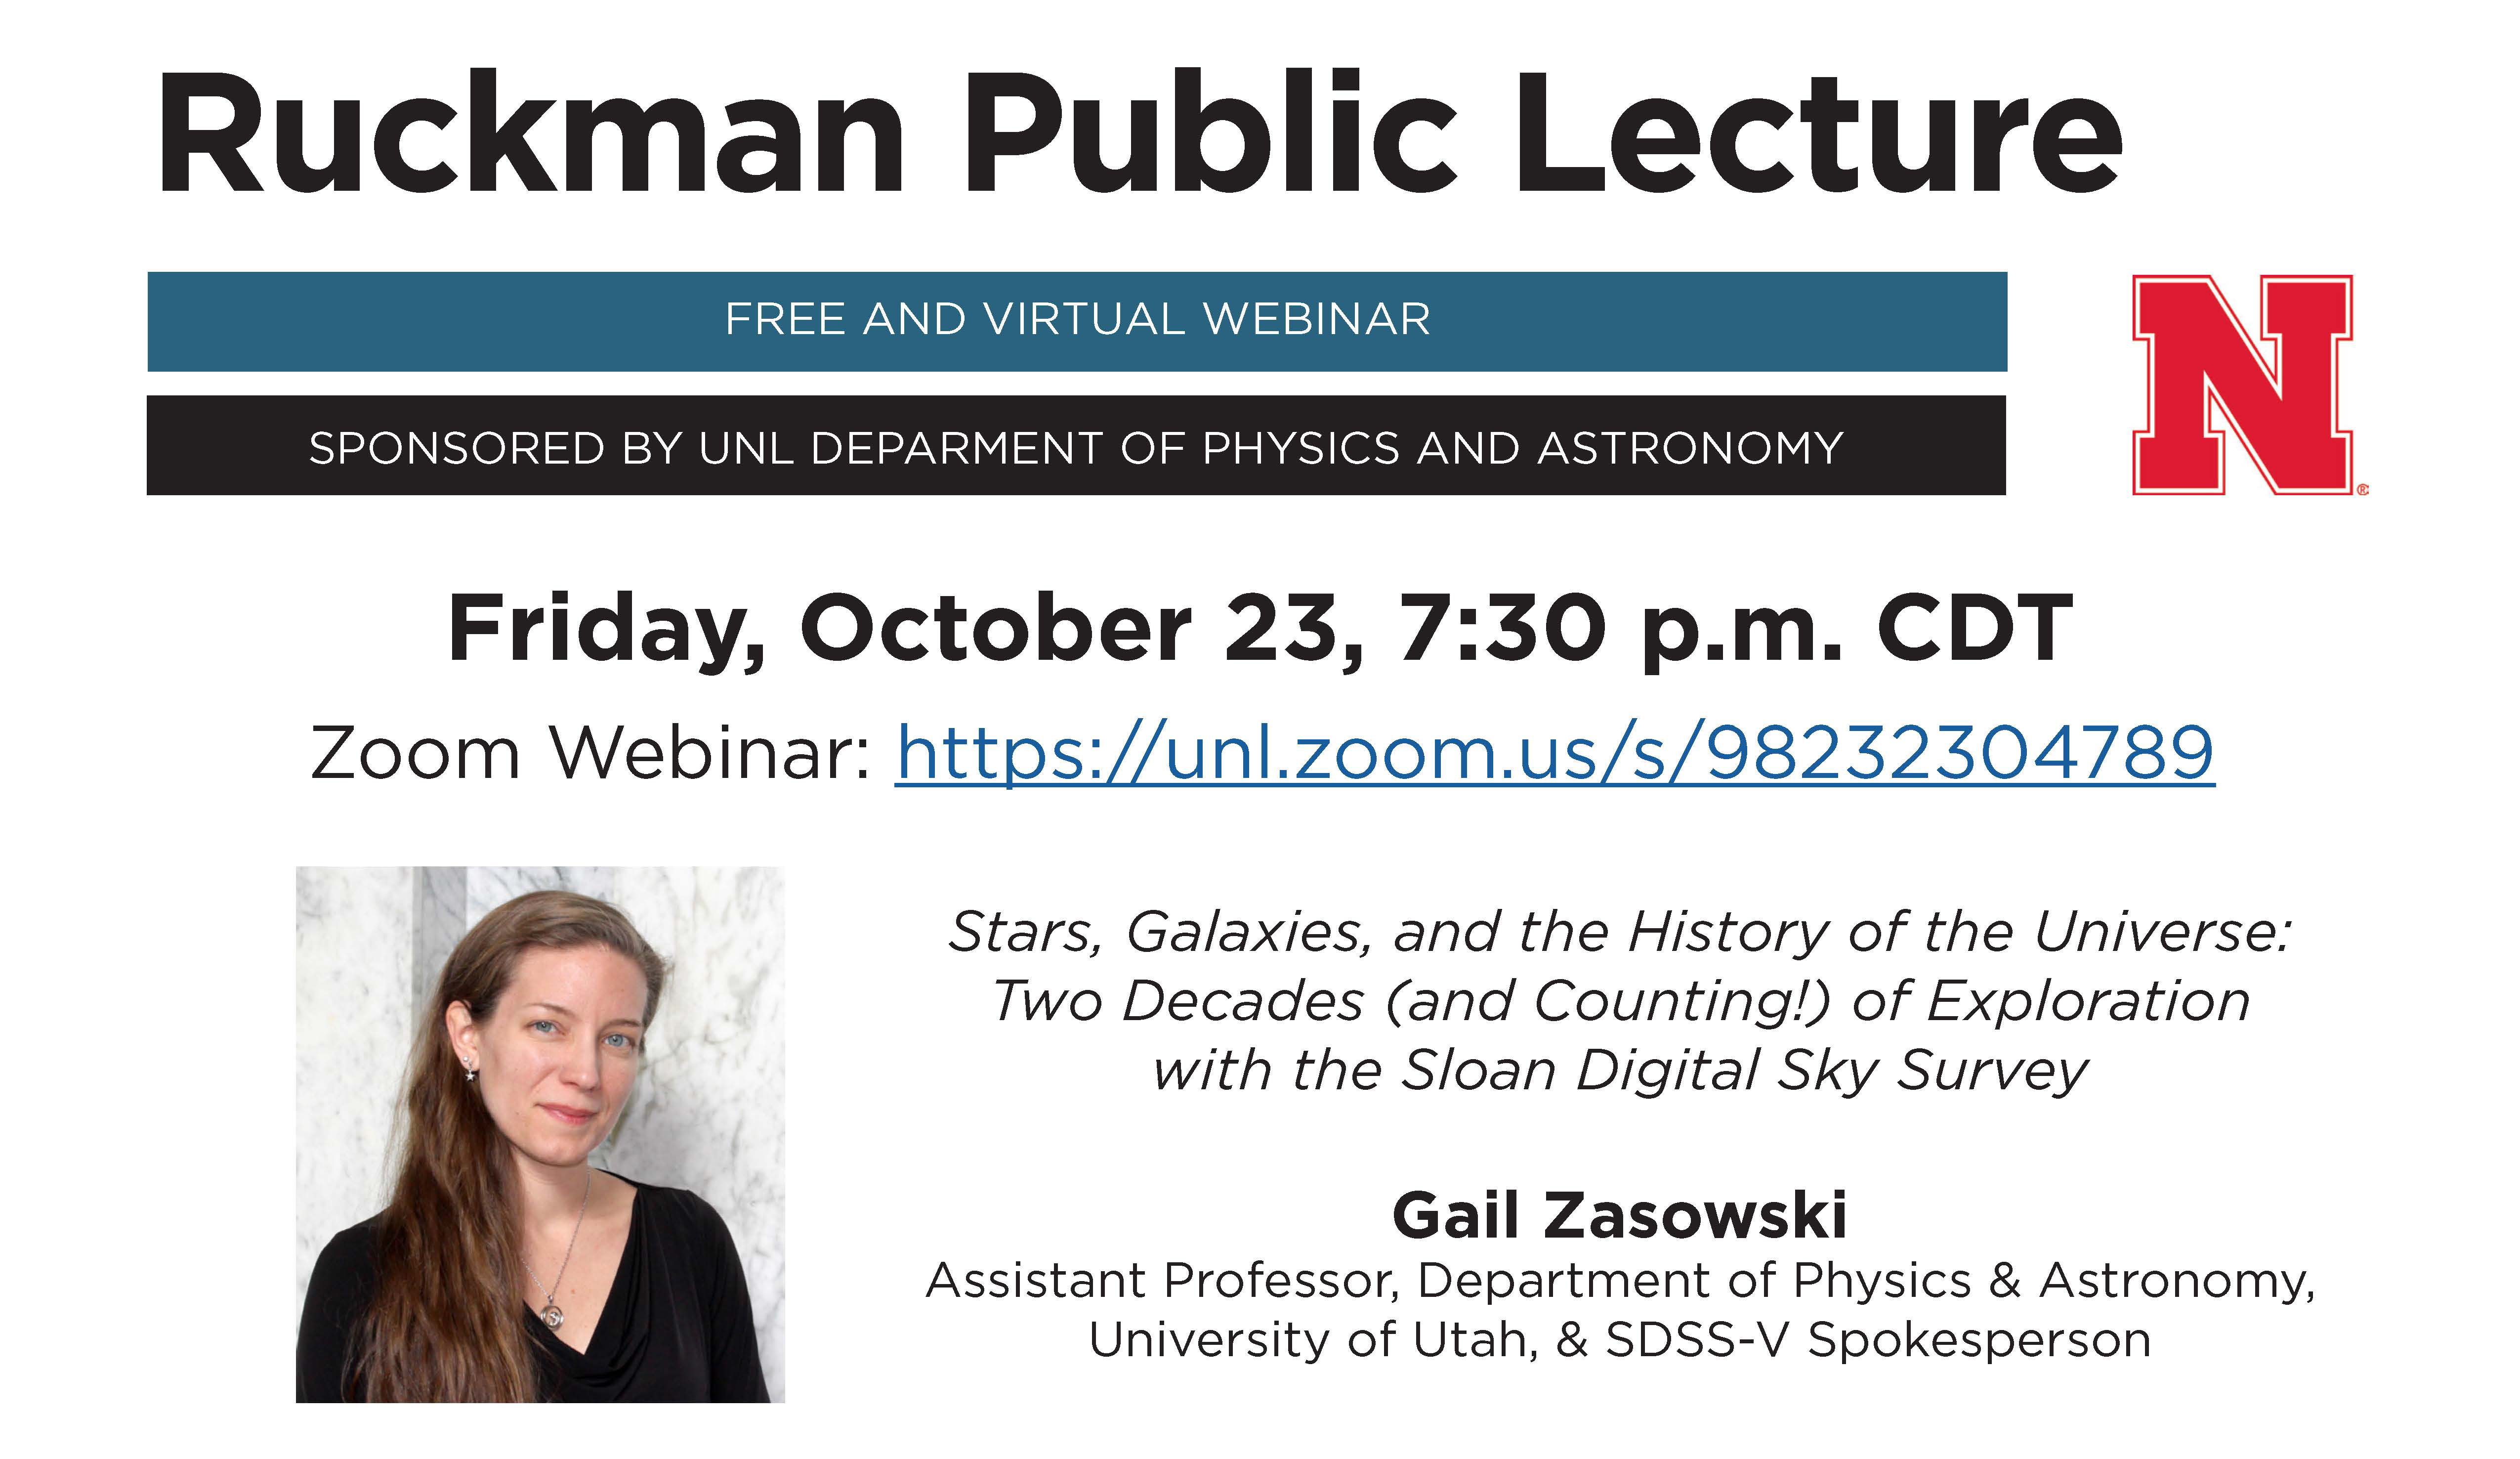 Ruckman Lecture to explore stars, galaxies, history of the universe, Nebraska Today